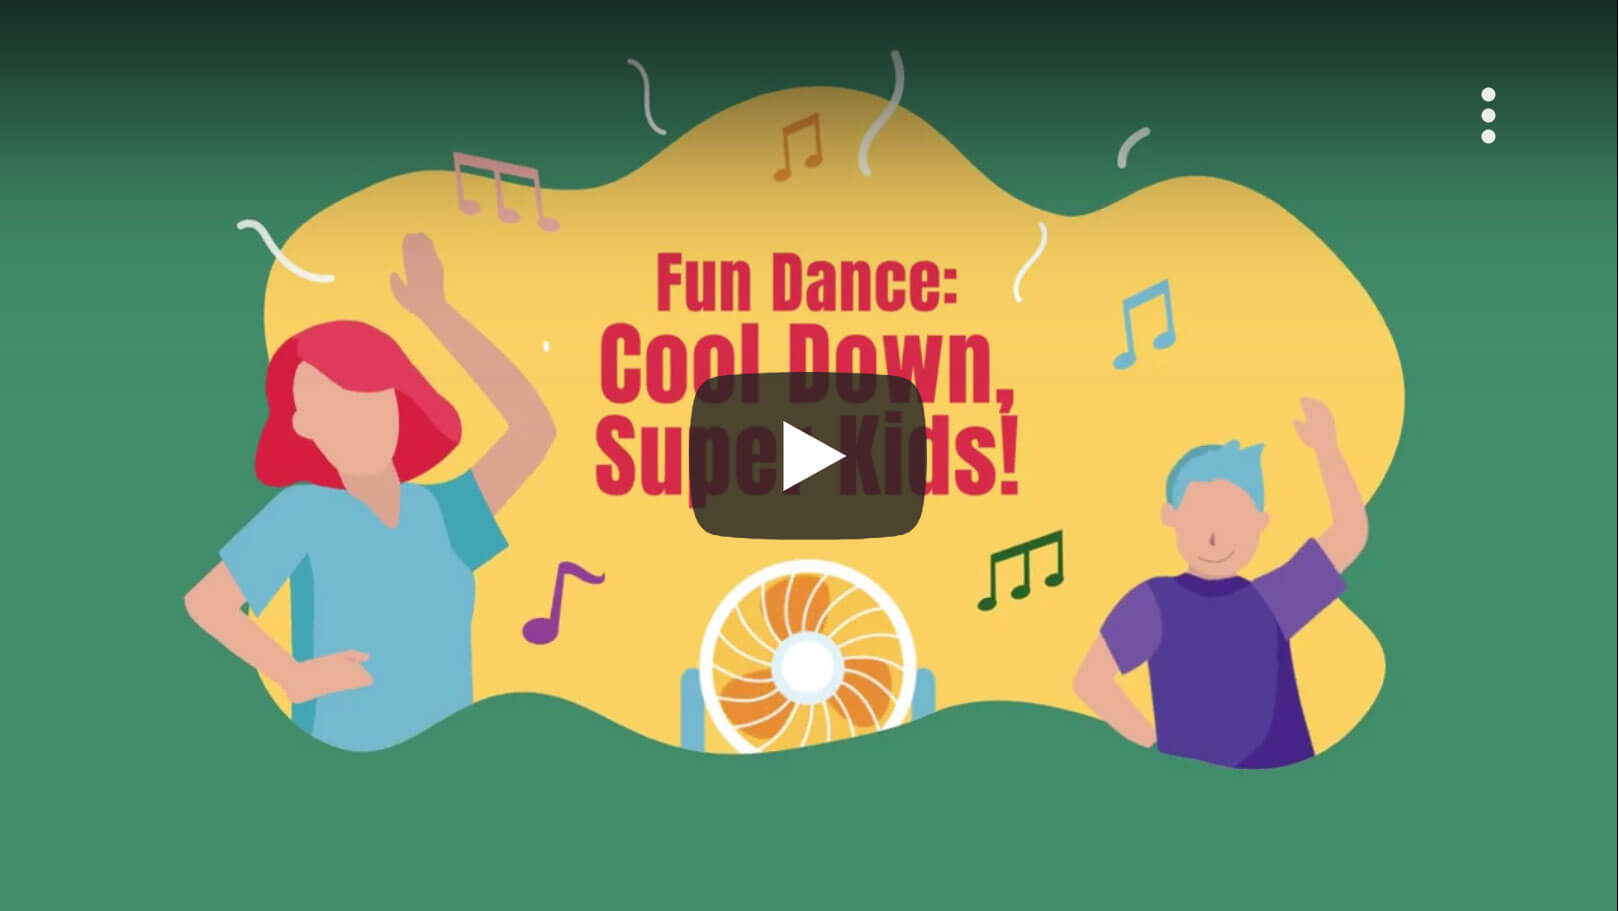 Fun Dance: Cool-down exercises for active little ones